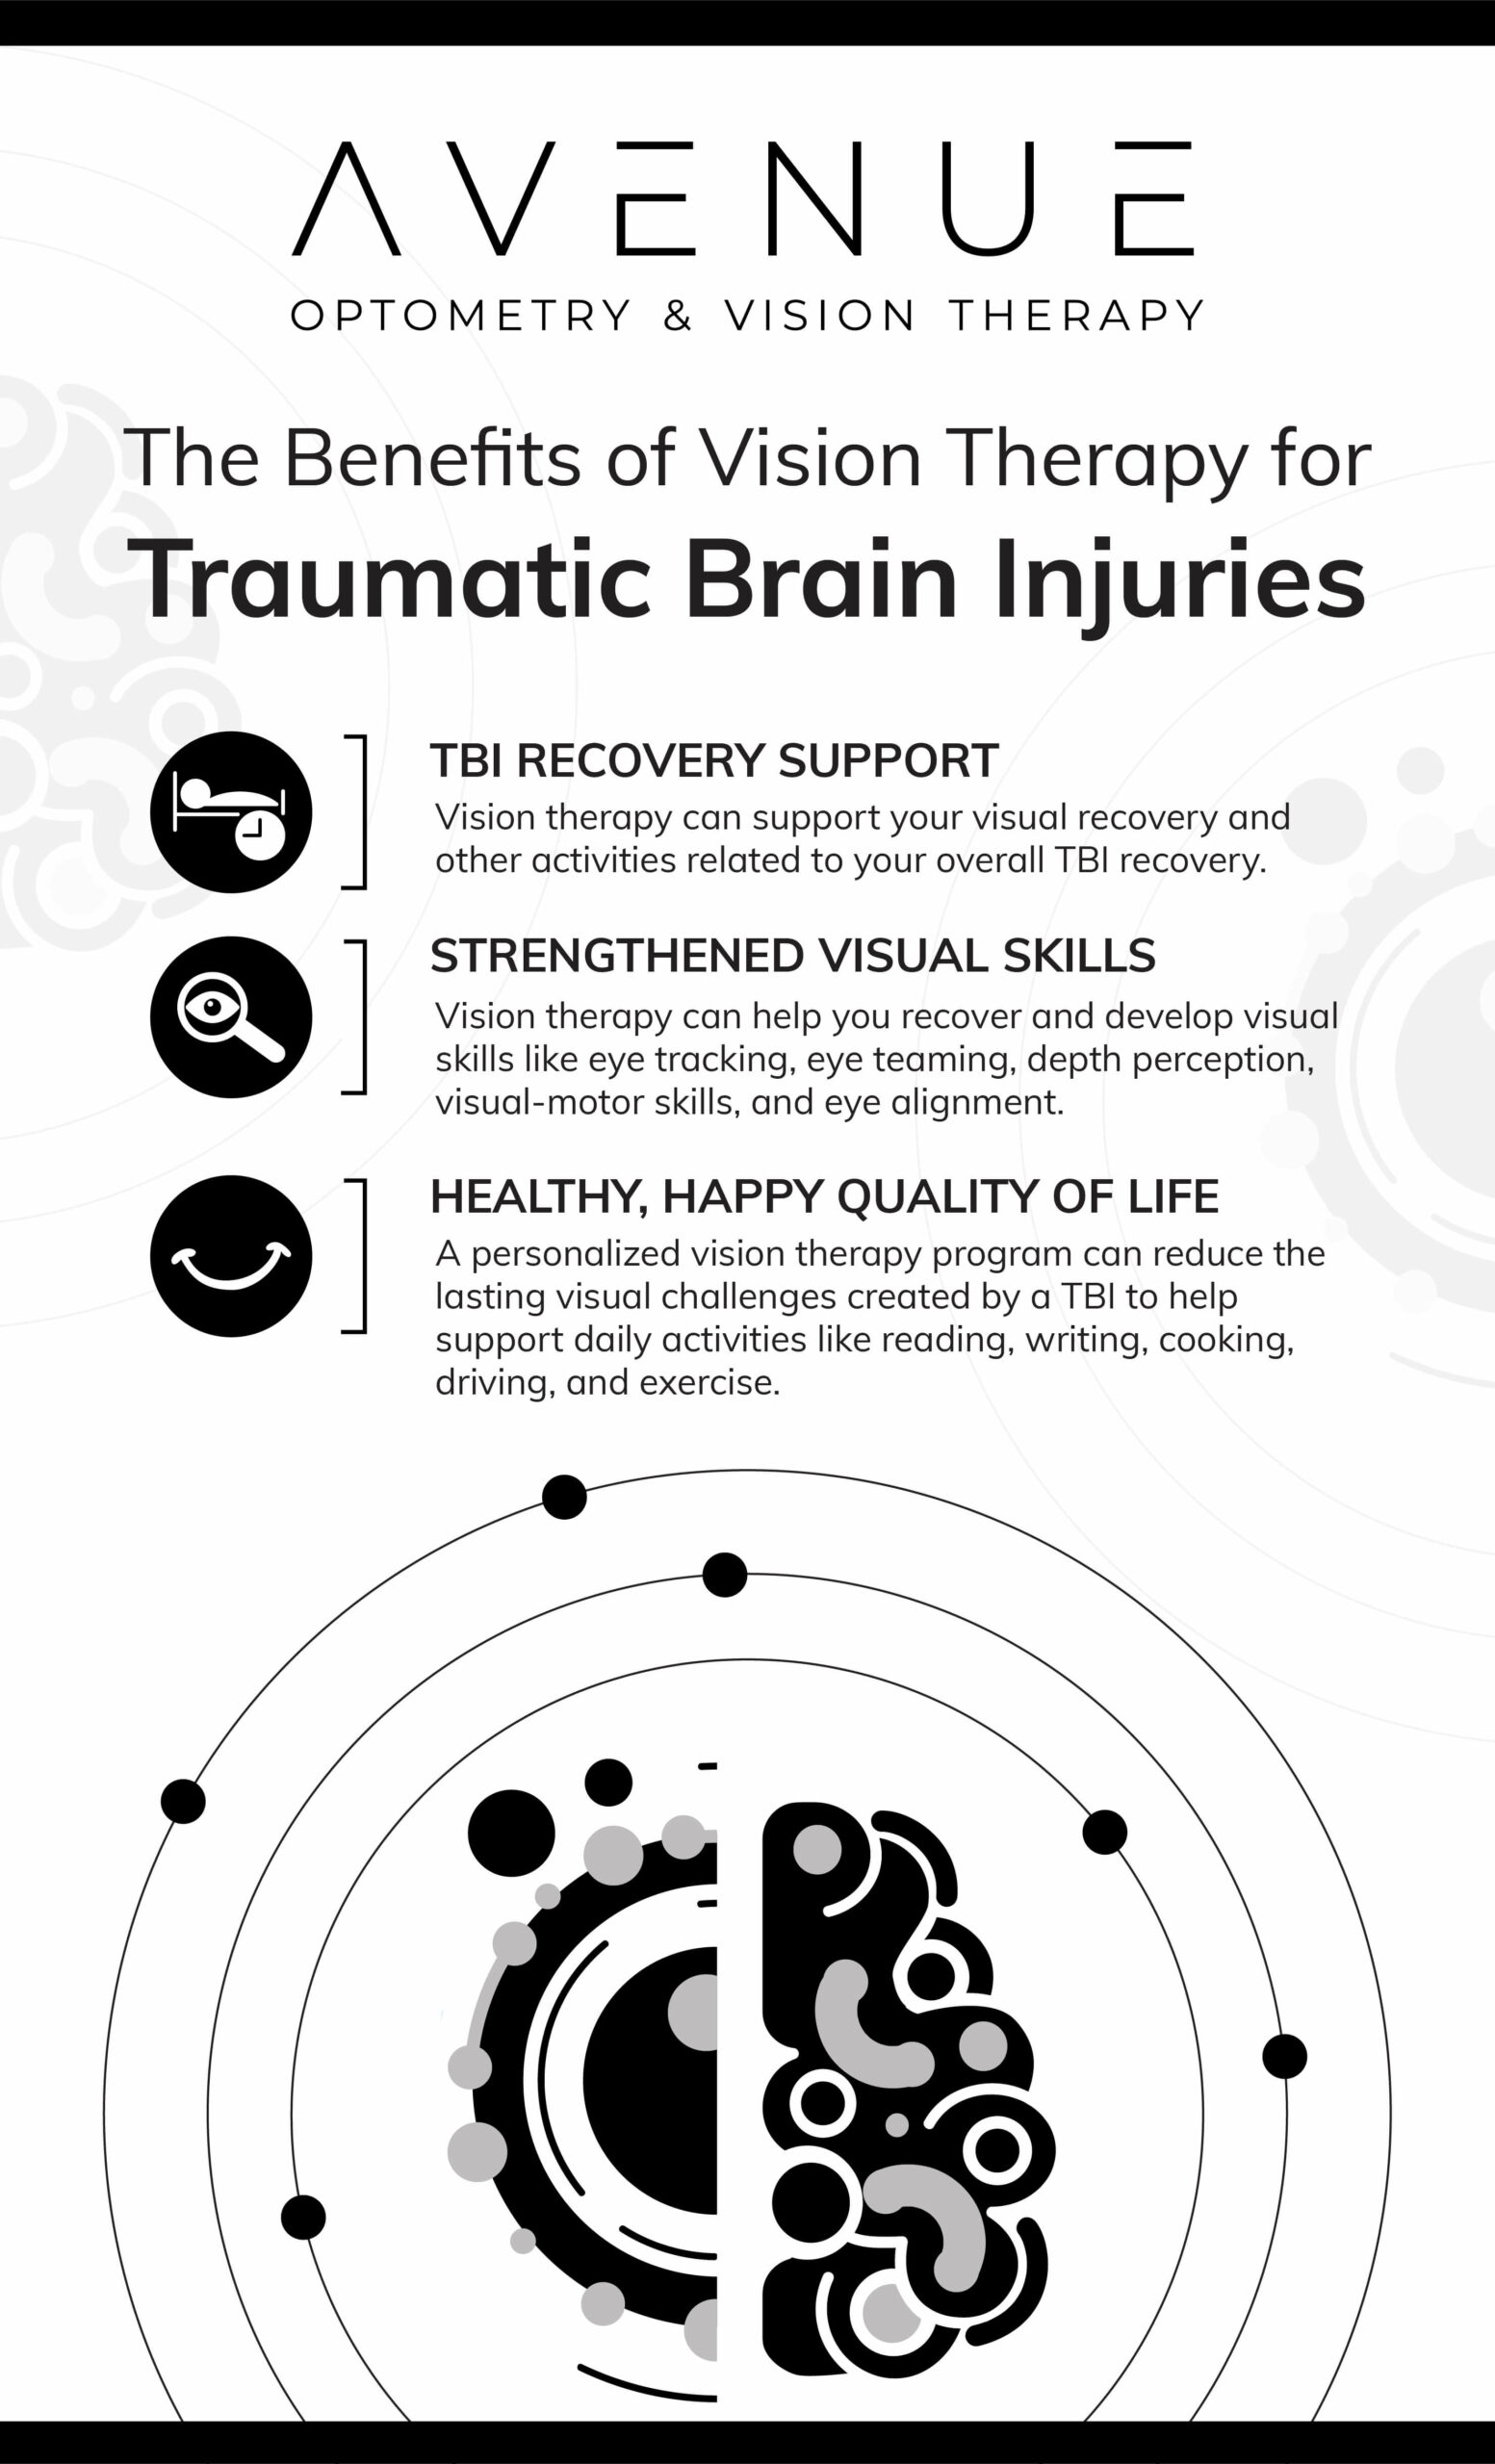 Avenue Optometry infographic covering the benefits of vision therapy for traumatic brain injury.